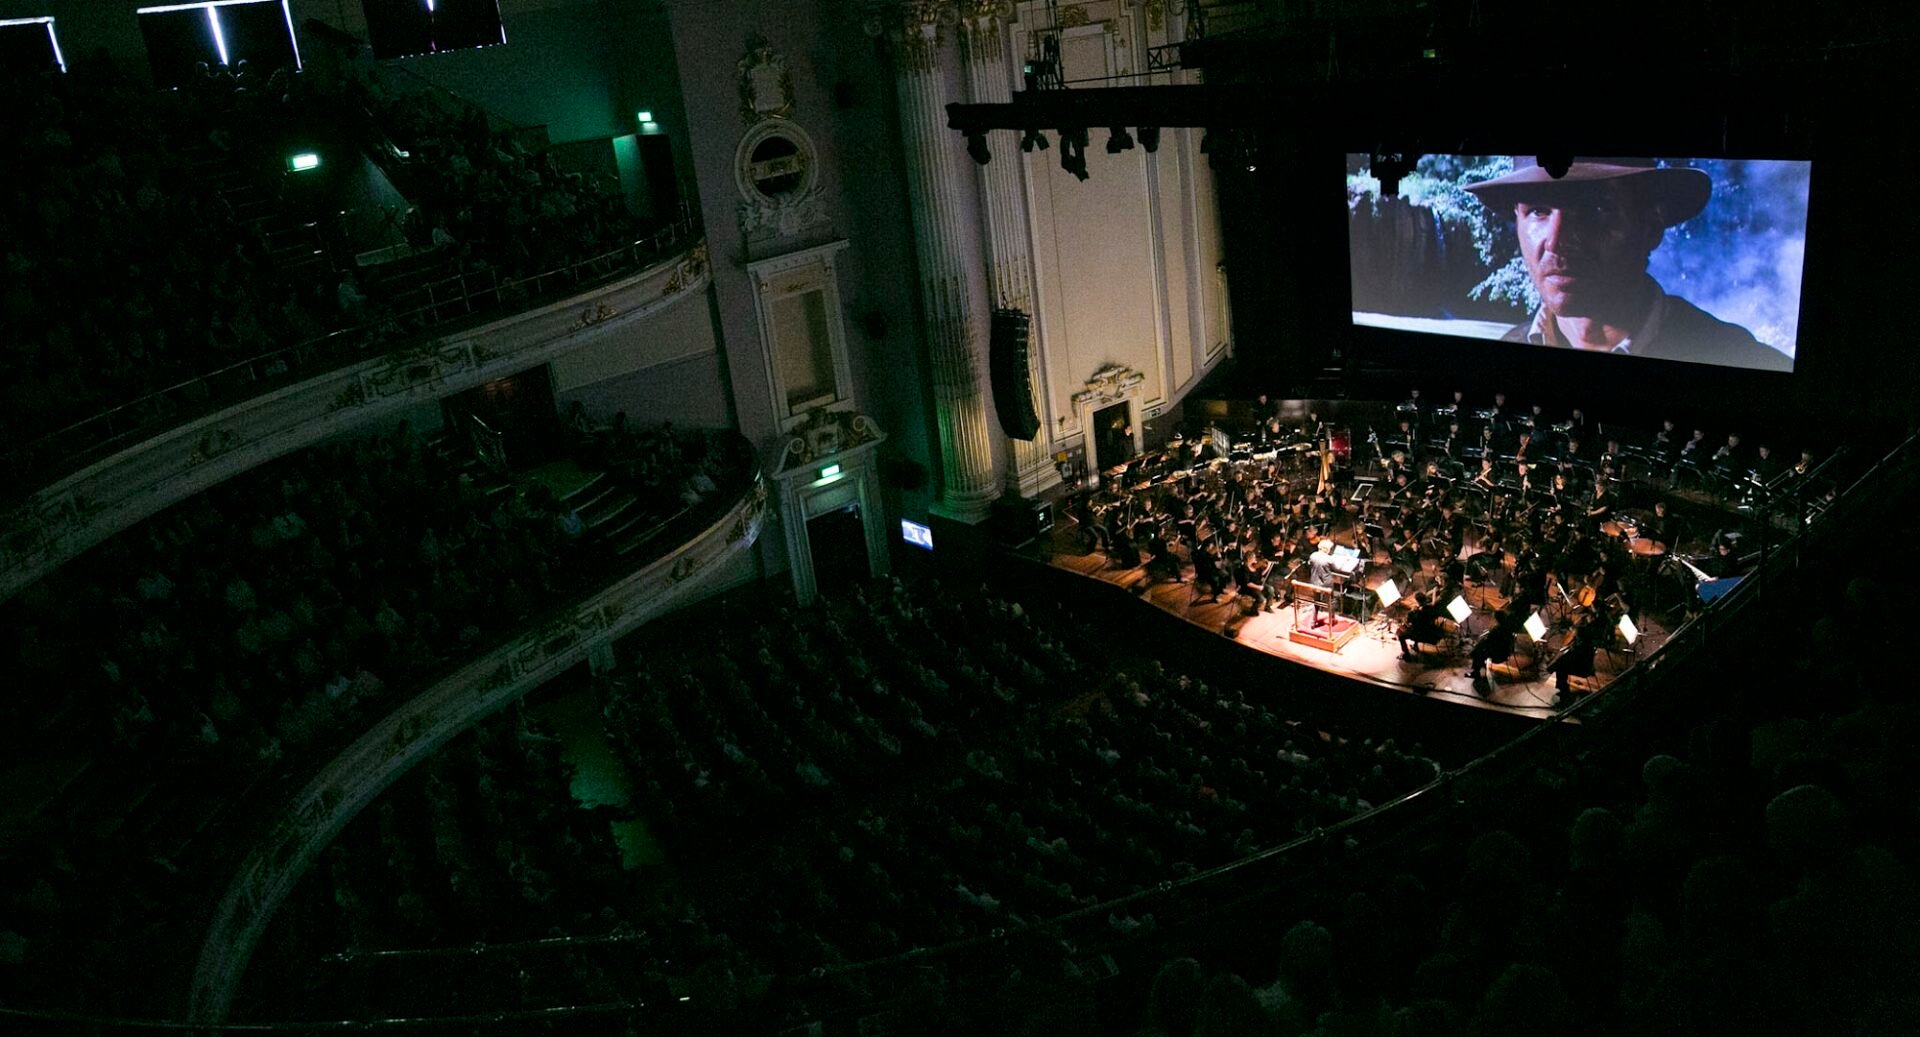 Raiders of the Lost Ark with RSNO/